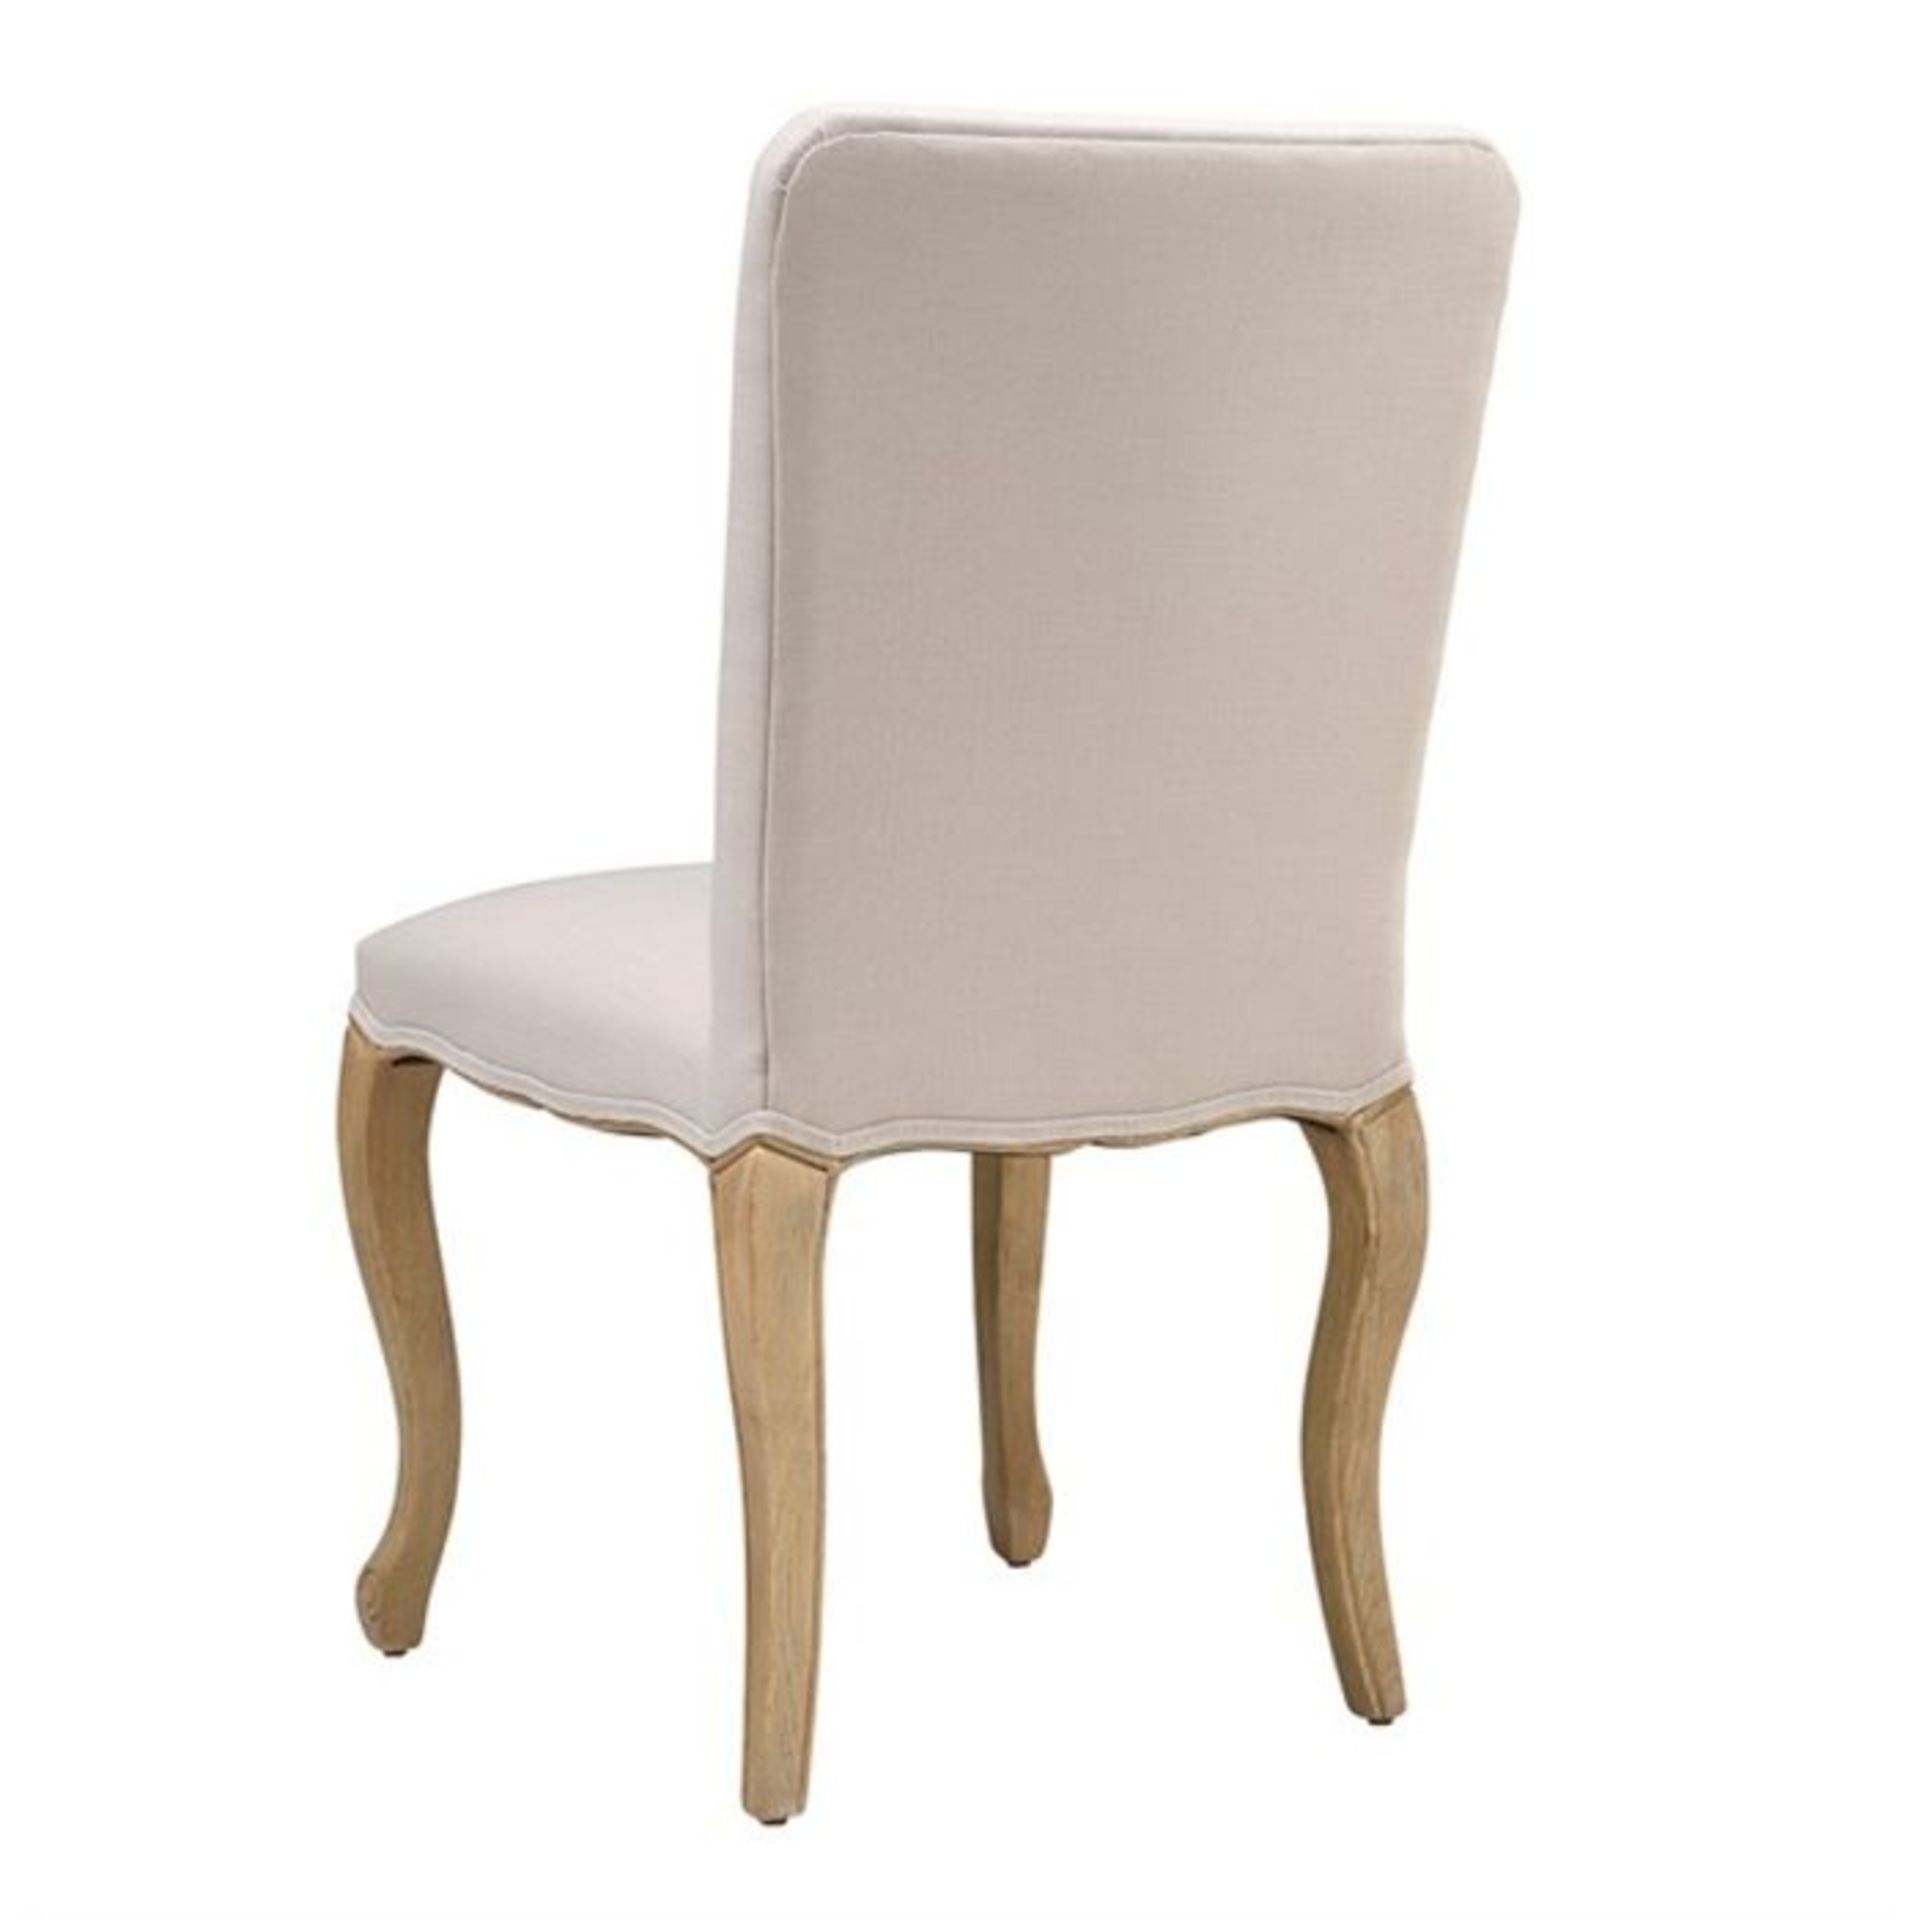 Cotswold Company Camille Limewash Oak Stone Linen Dining Chair RRP ?275.00 Complementing the Camille - Image 7 of 8